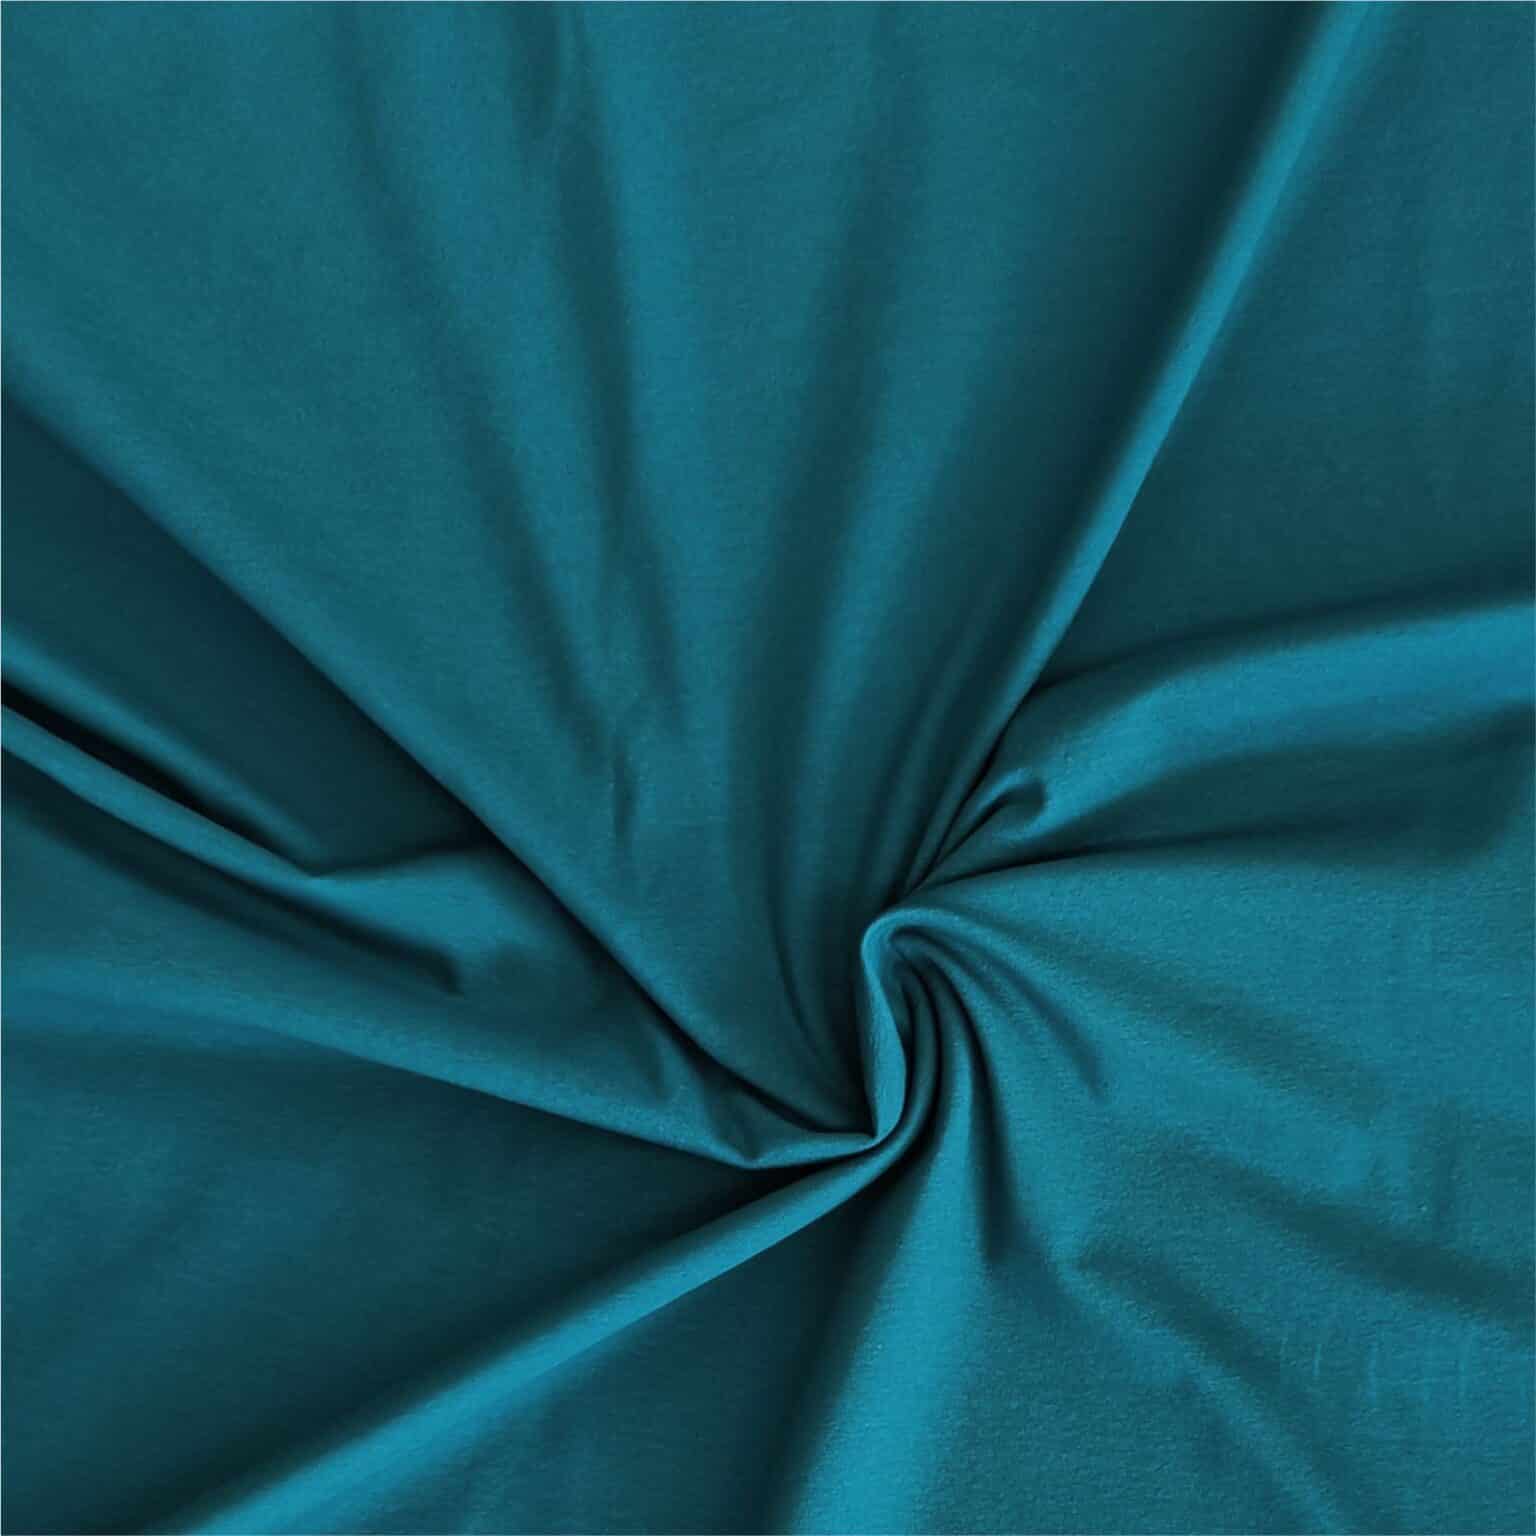 dark teal plain cotton jersey fabric | More Sewing